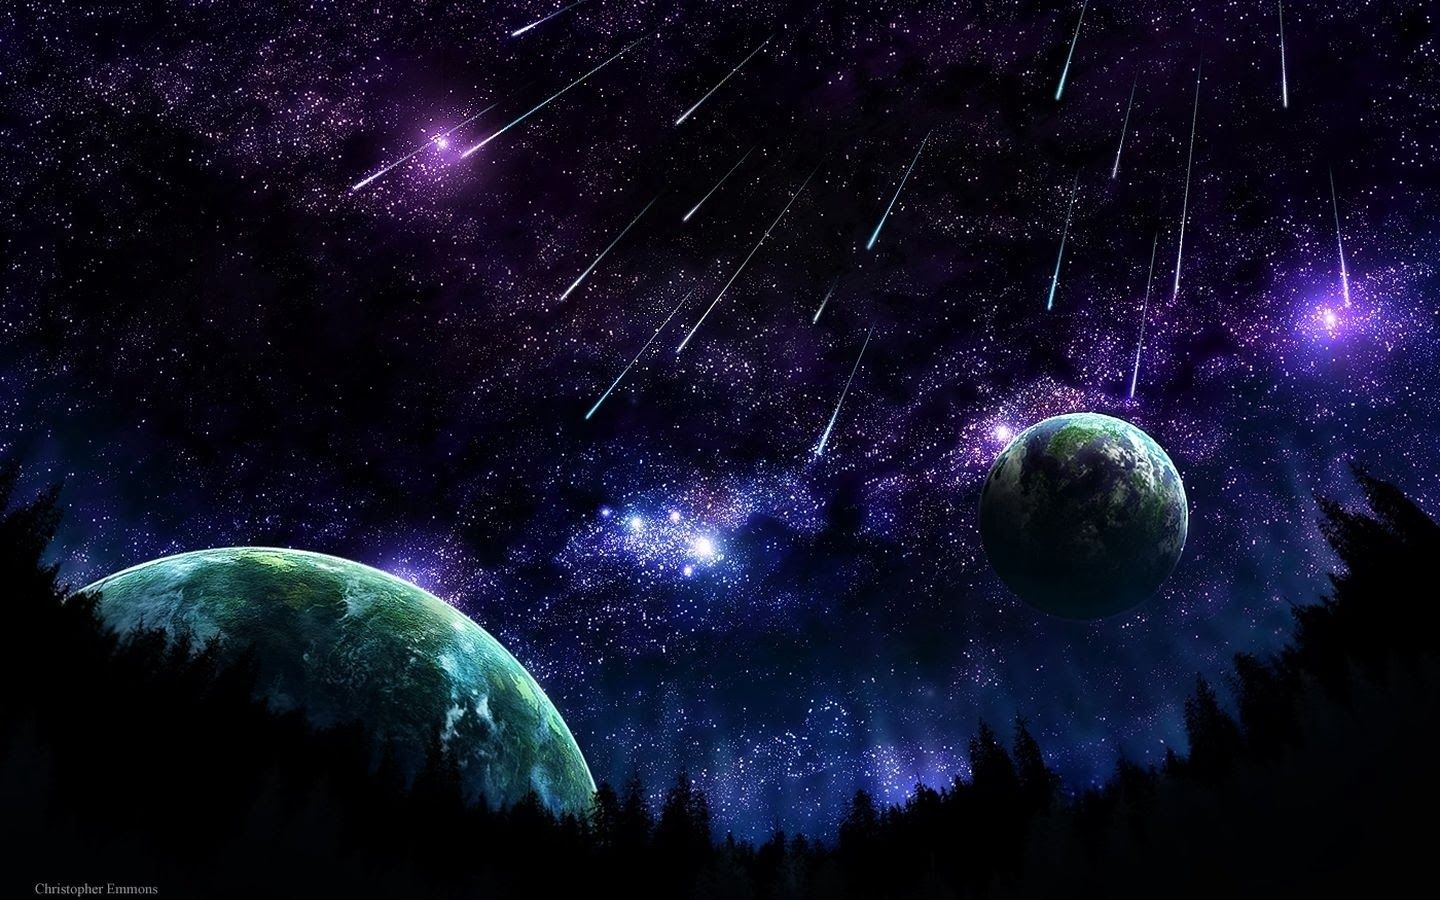 Informative Thoughts: In Layman's Terms: Space Time Continuum. Space Art Wallpaper, HD Space, Wallpaper Space